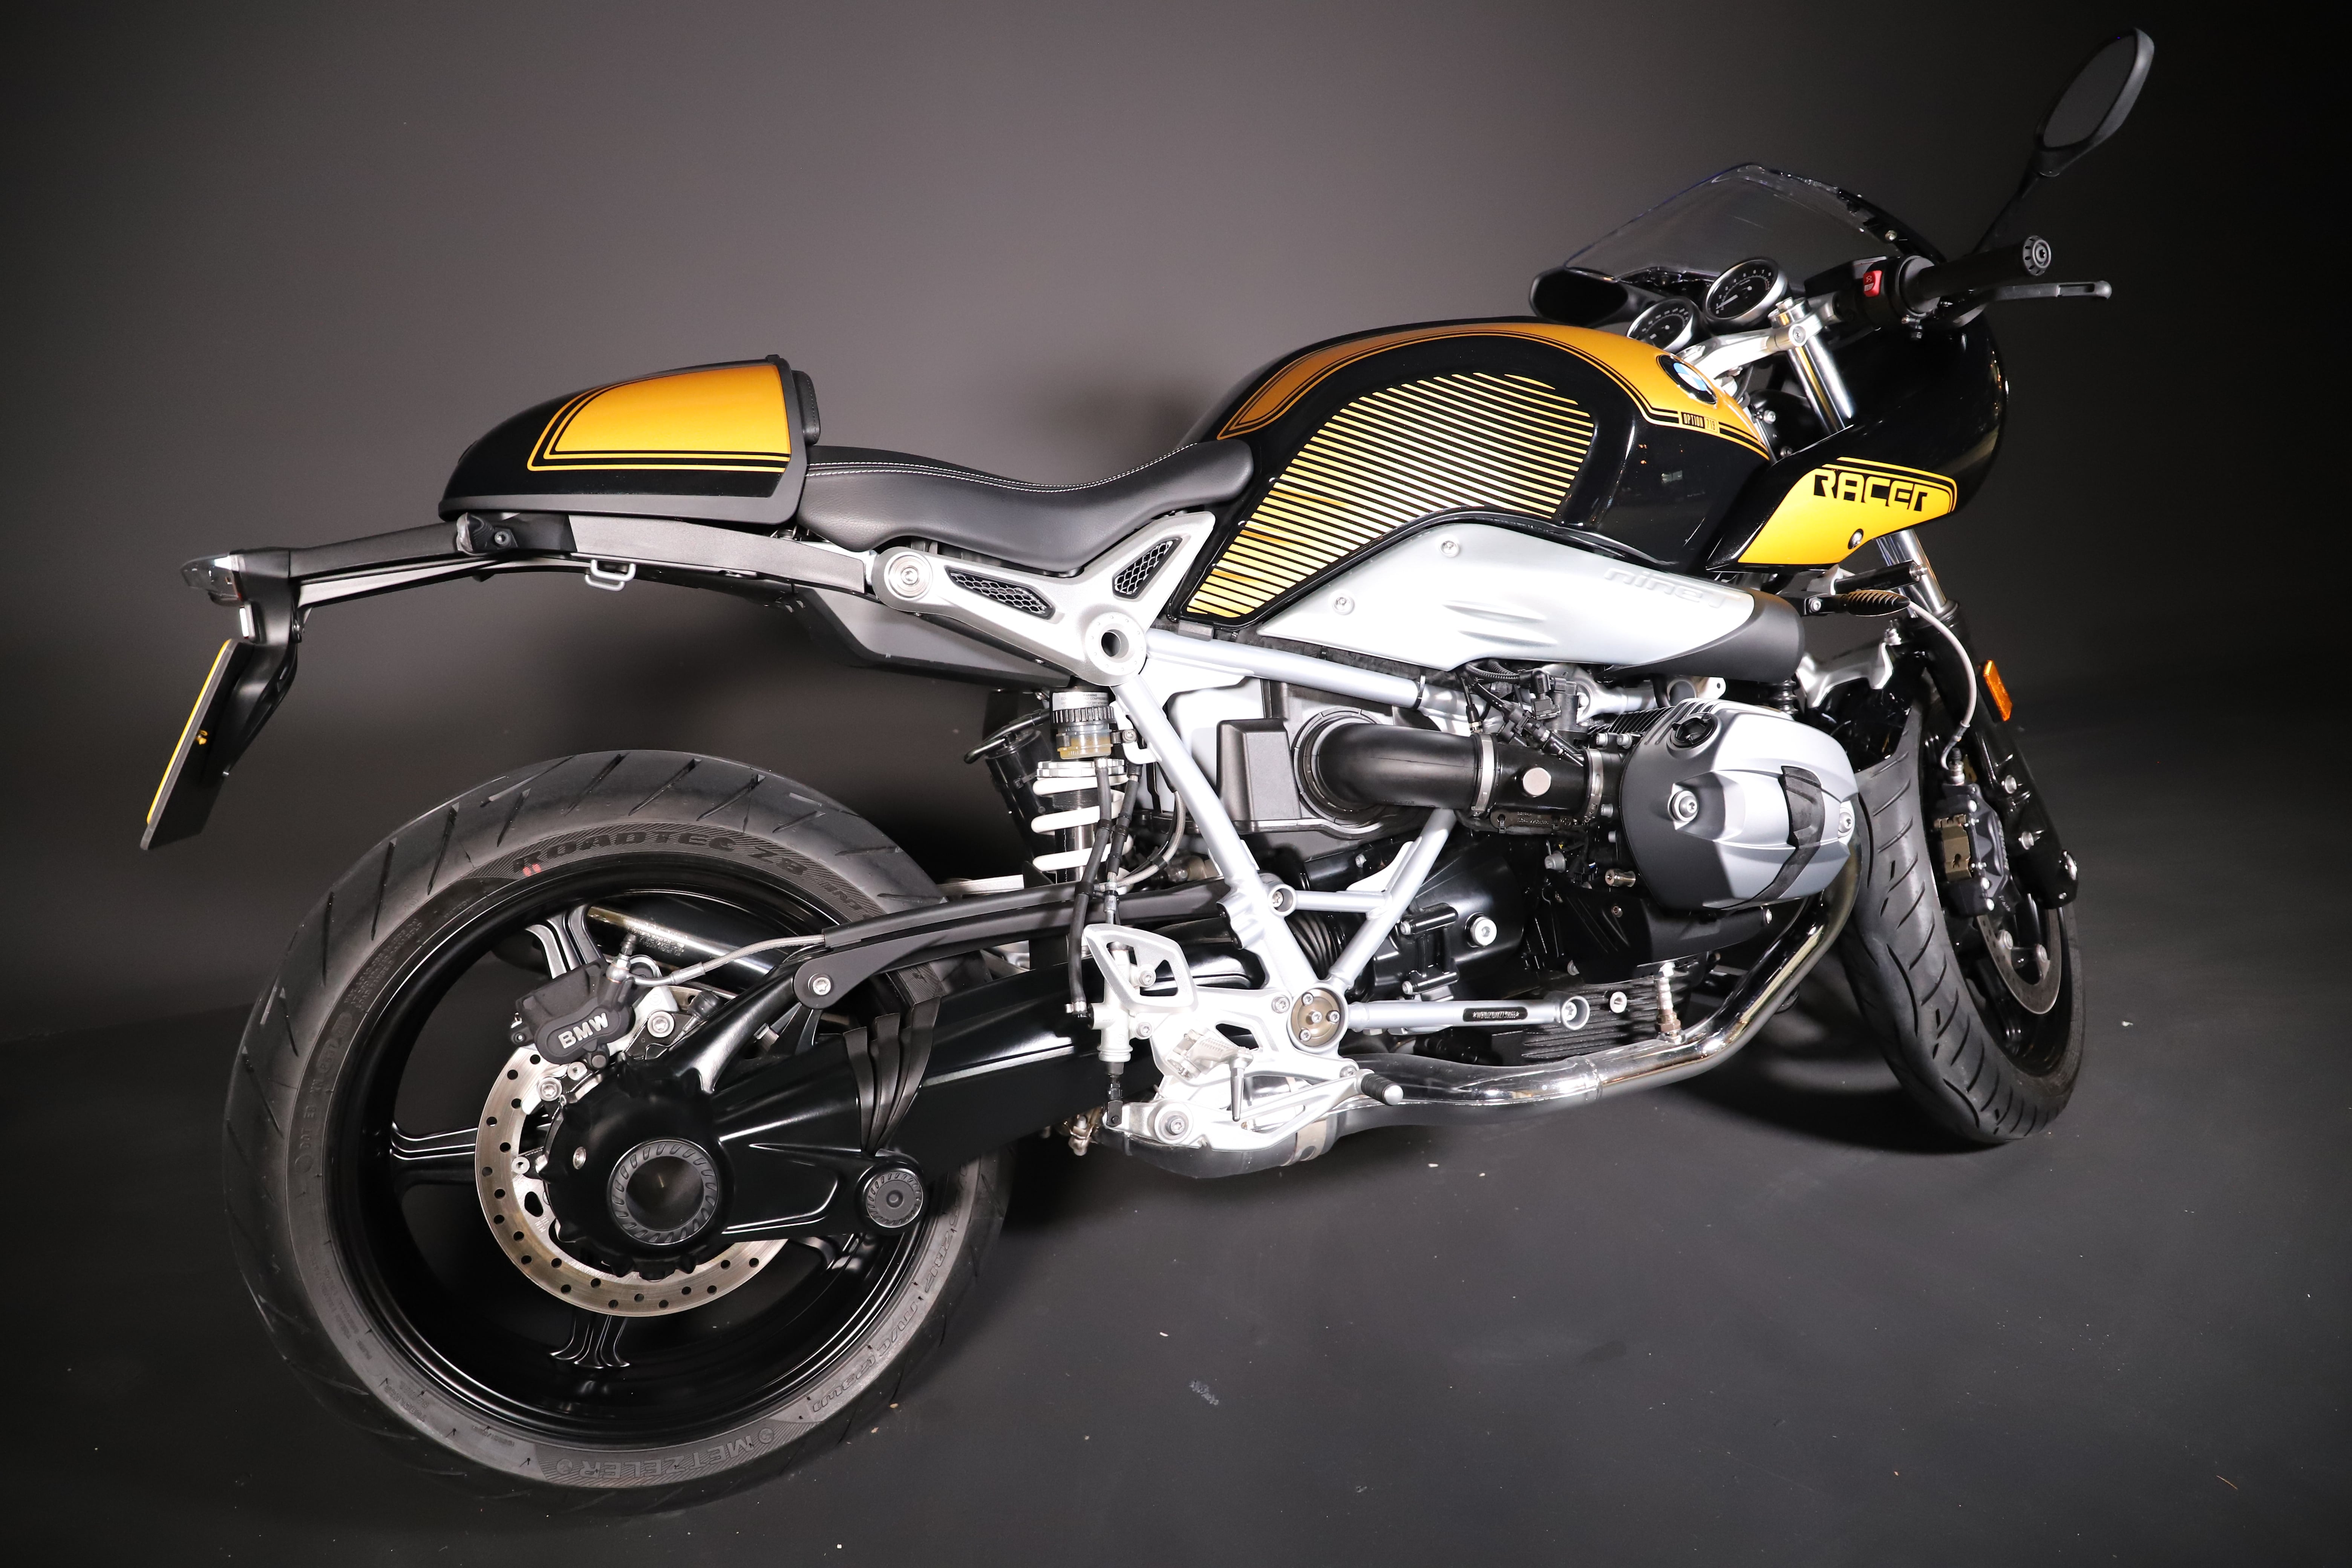 Bmw R 9 T Racer - BMW R Nine T Racer Motorcycle | Uncrate / Far removed ...